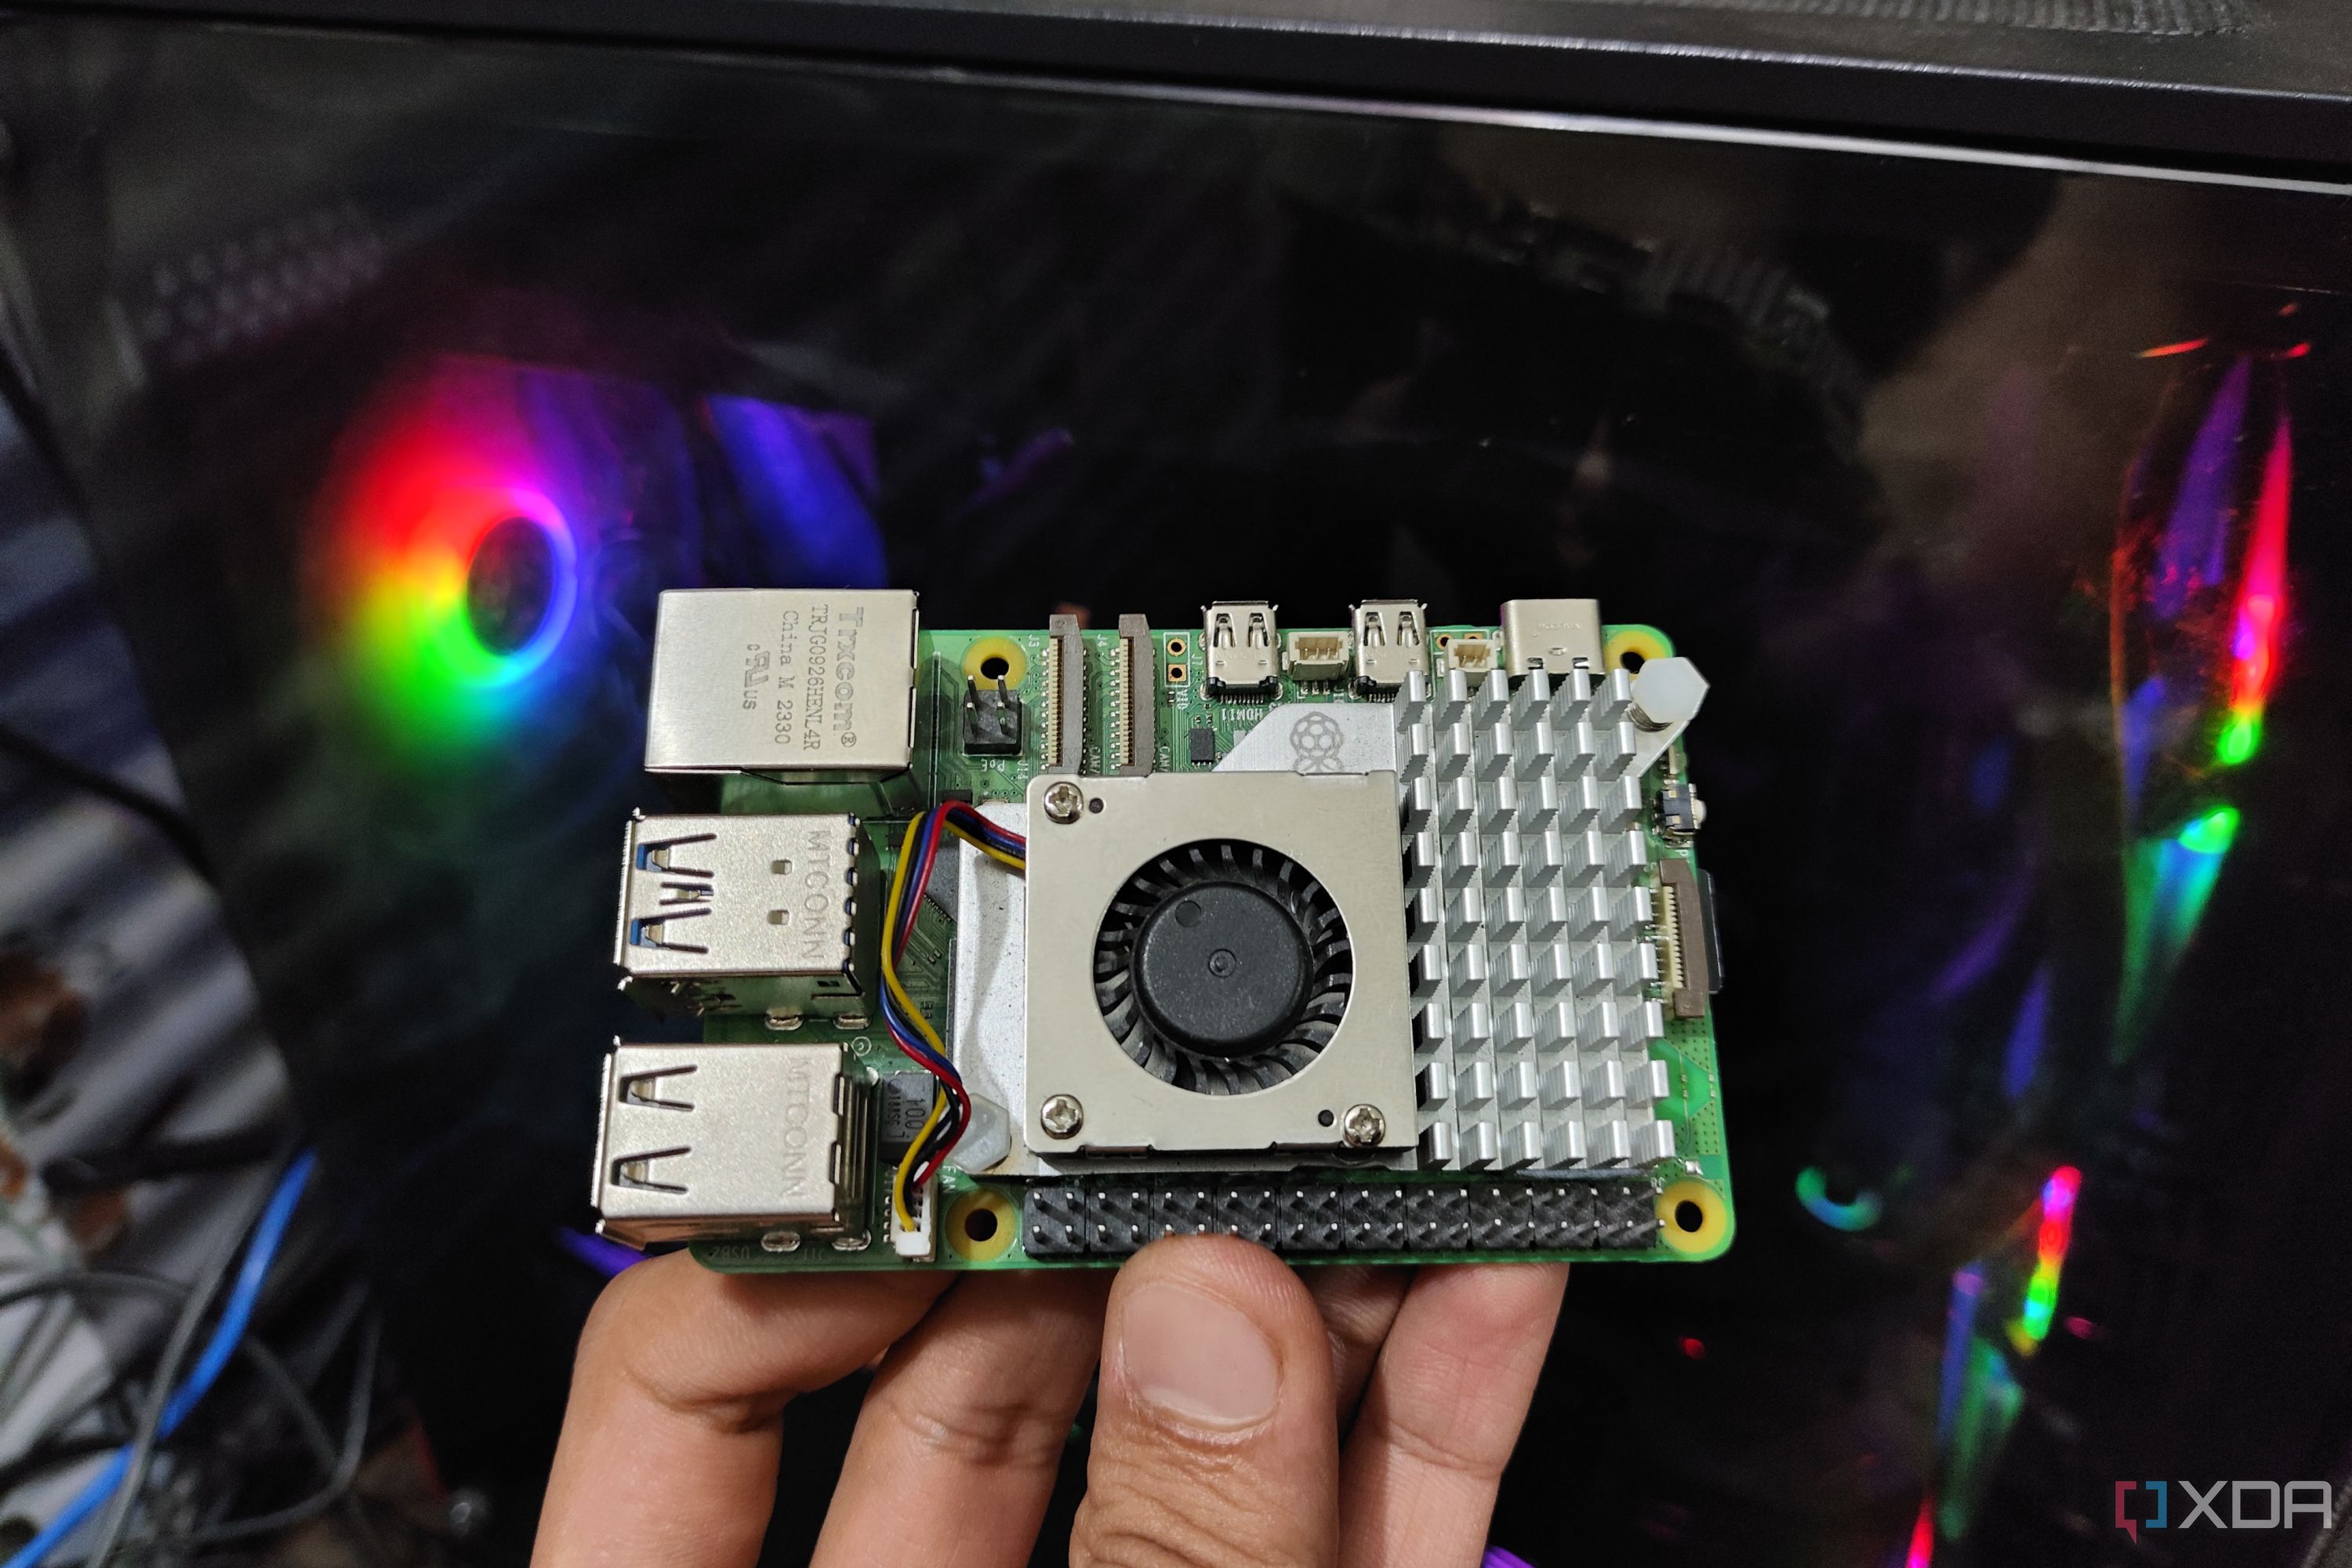 A Raspberry Pi 5 held in front of a PC